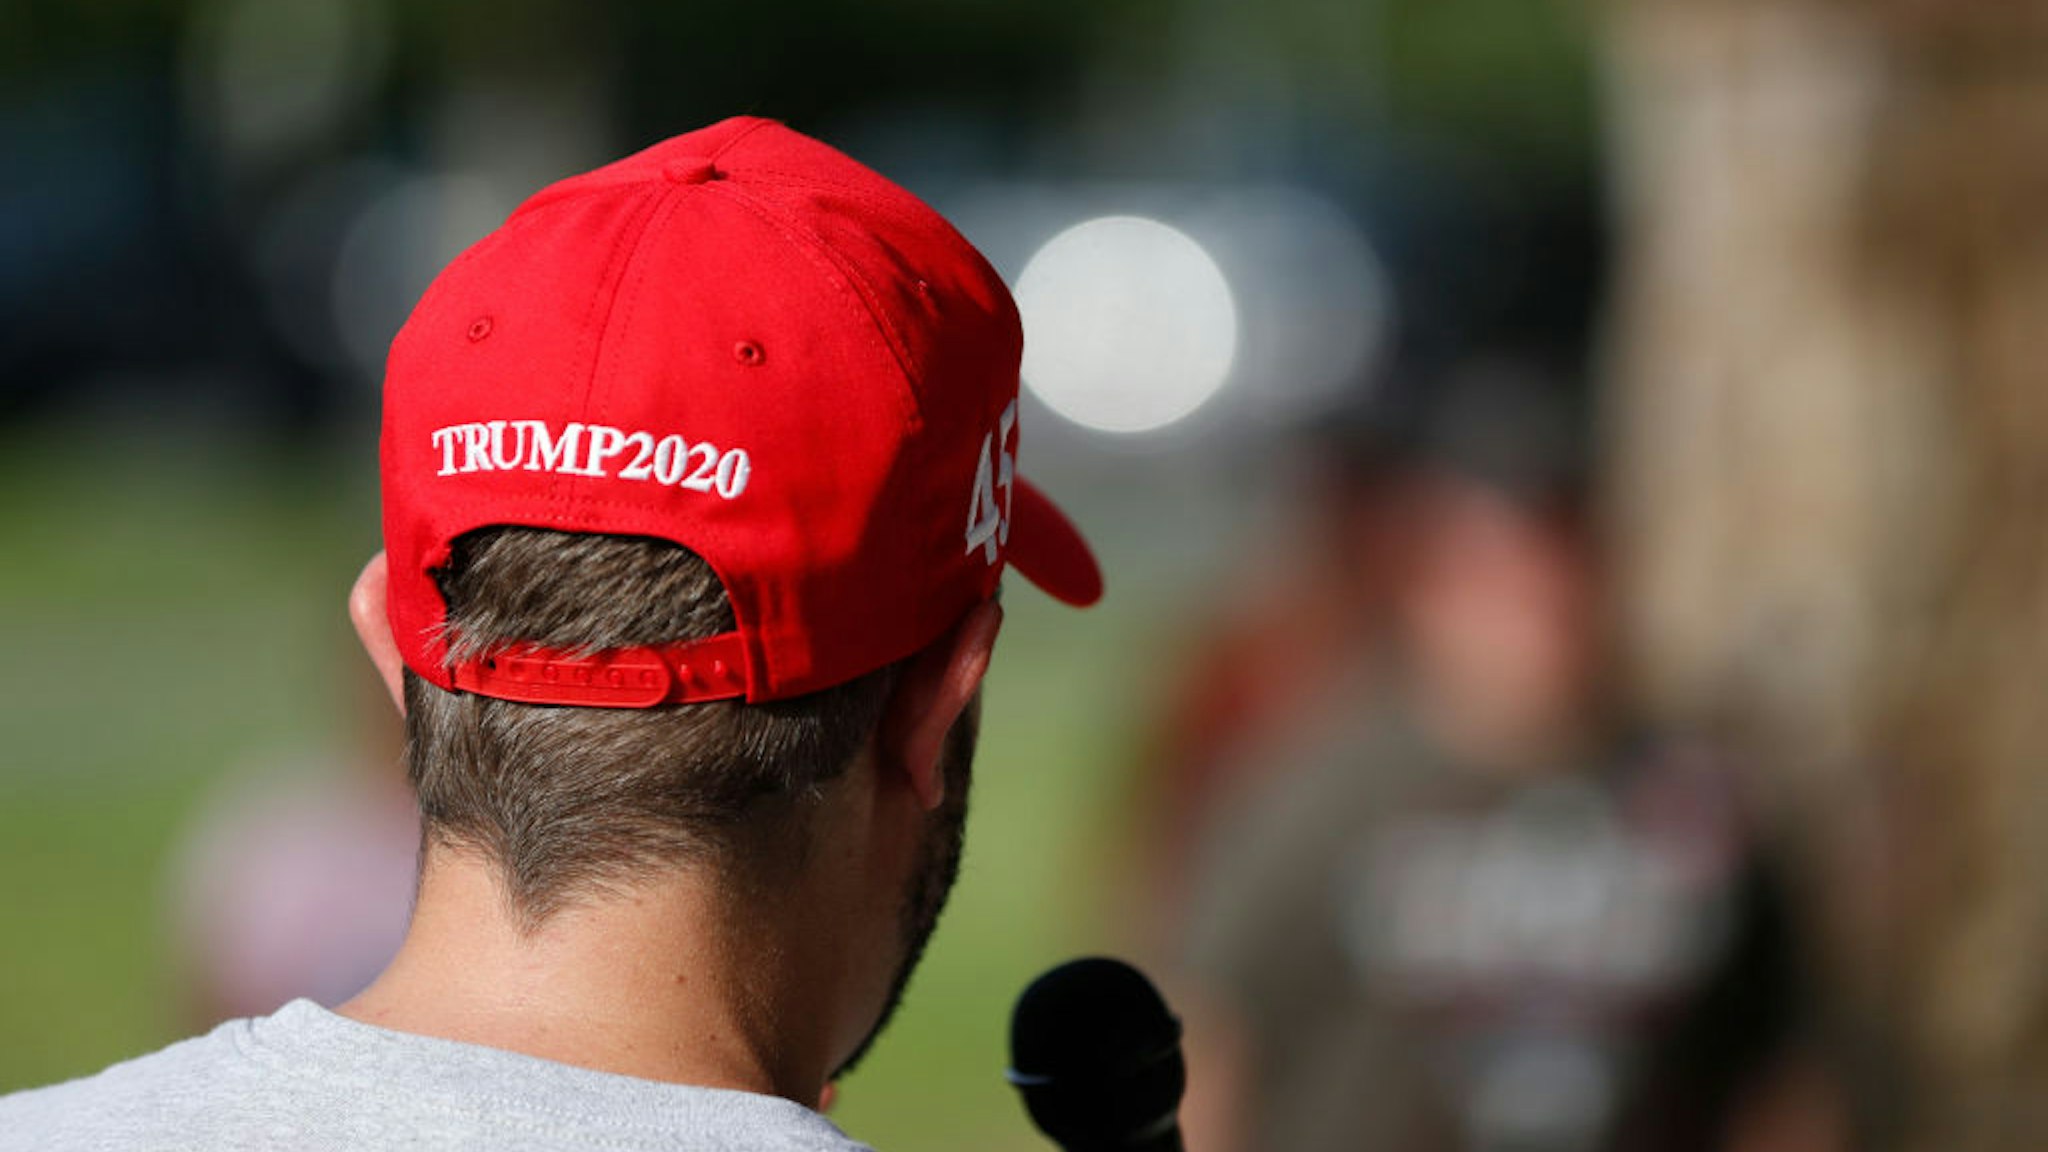 CHARLOTTE, NC - AUGUST 27: A President Donald Trump supporter speaks talks on the microphone during the RNC 2020 Trump Biker Rally & Back the Blue Parade held at Park Road Park on August 27, 2020 in Charlotte, North Carolina. The bike rally for Trump will watch the Republican National Convention at a local sports bar to see President Donald Trump gives his acceptance speech. (Photo by Octavio Jones/Getty Images)